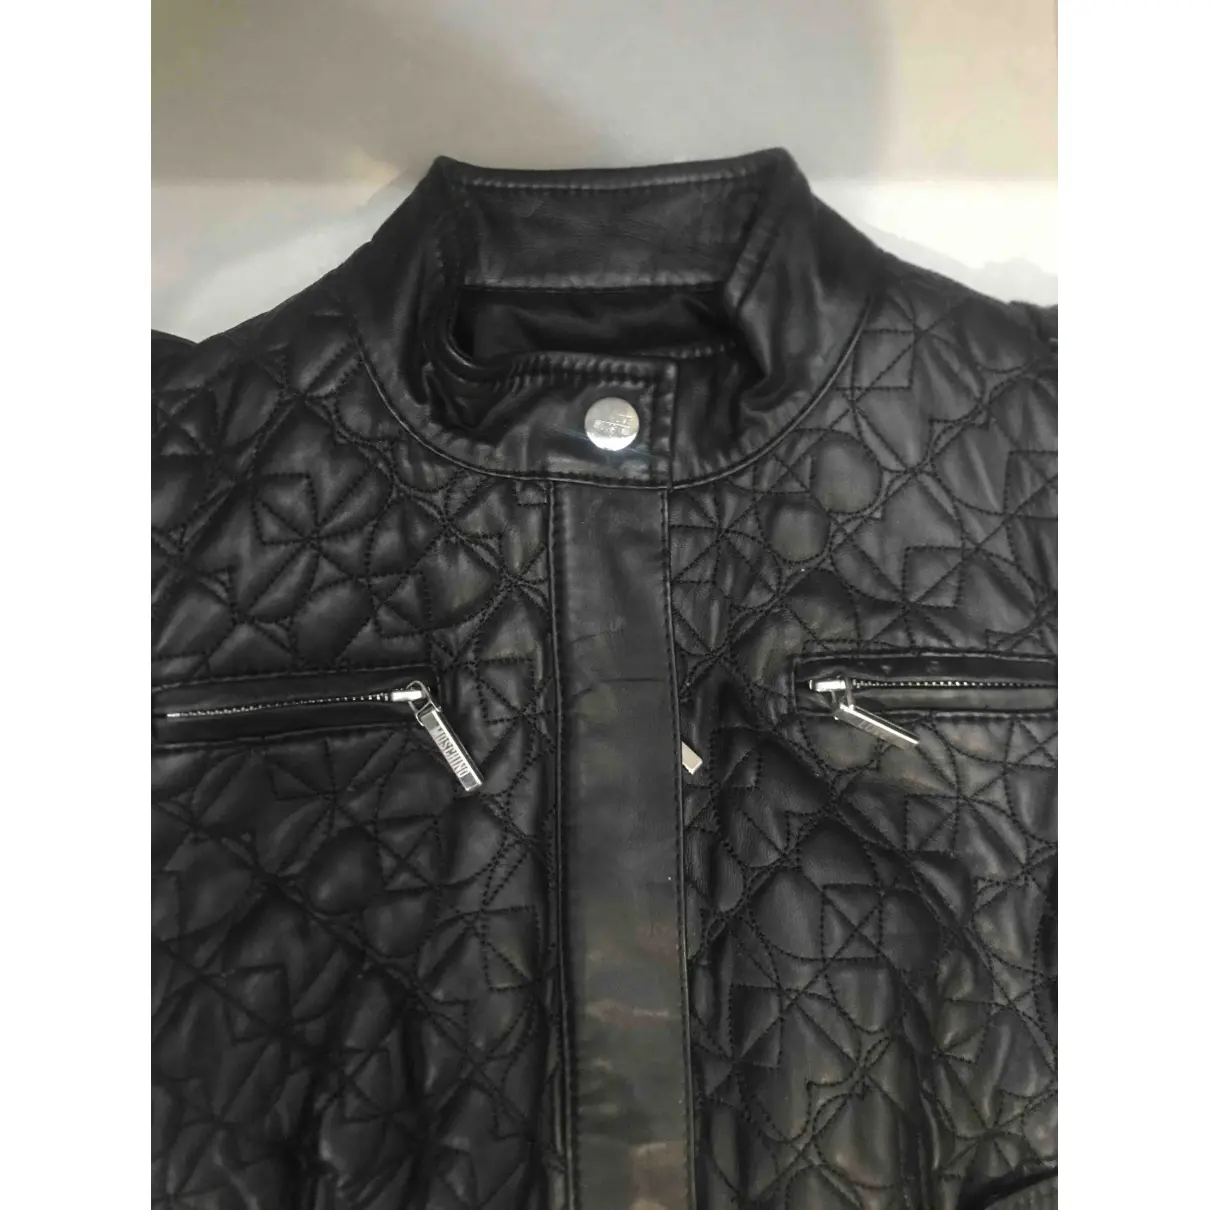 Buy Moschino Love Leather jacket online